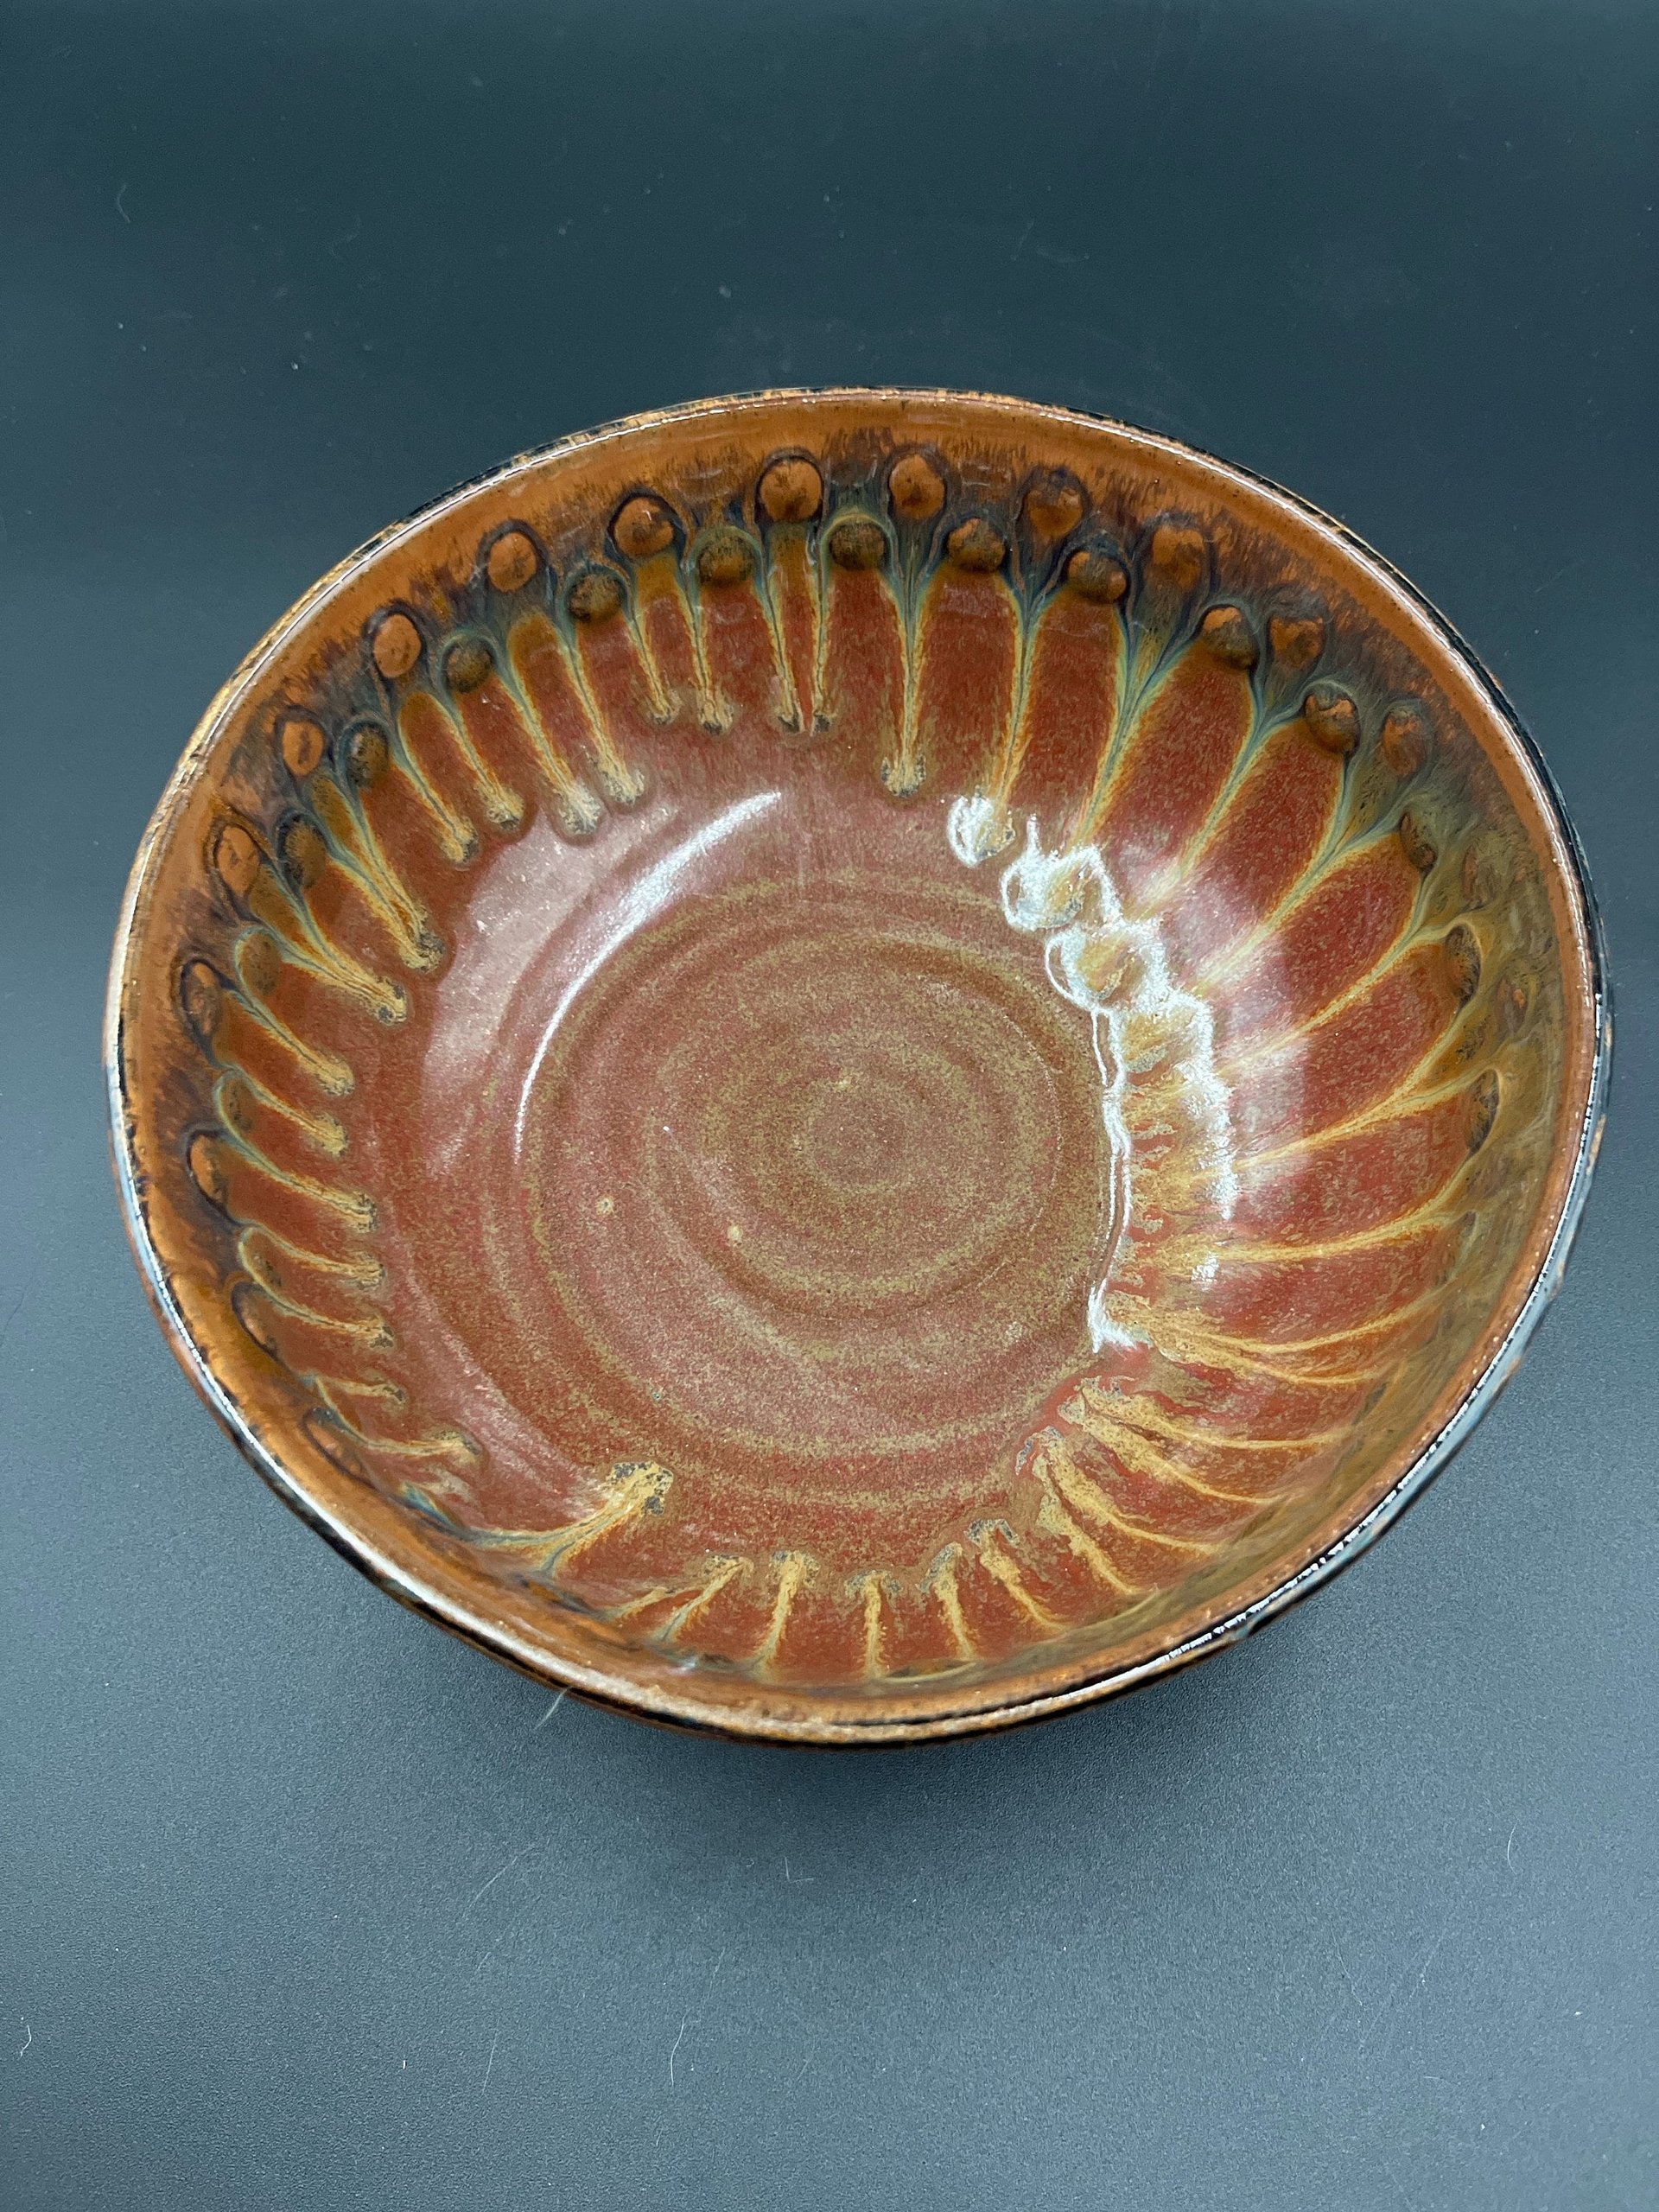 Hand-made Polka-dot Earthy Red and Honey Serving Bowl